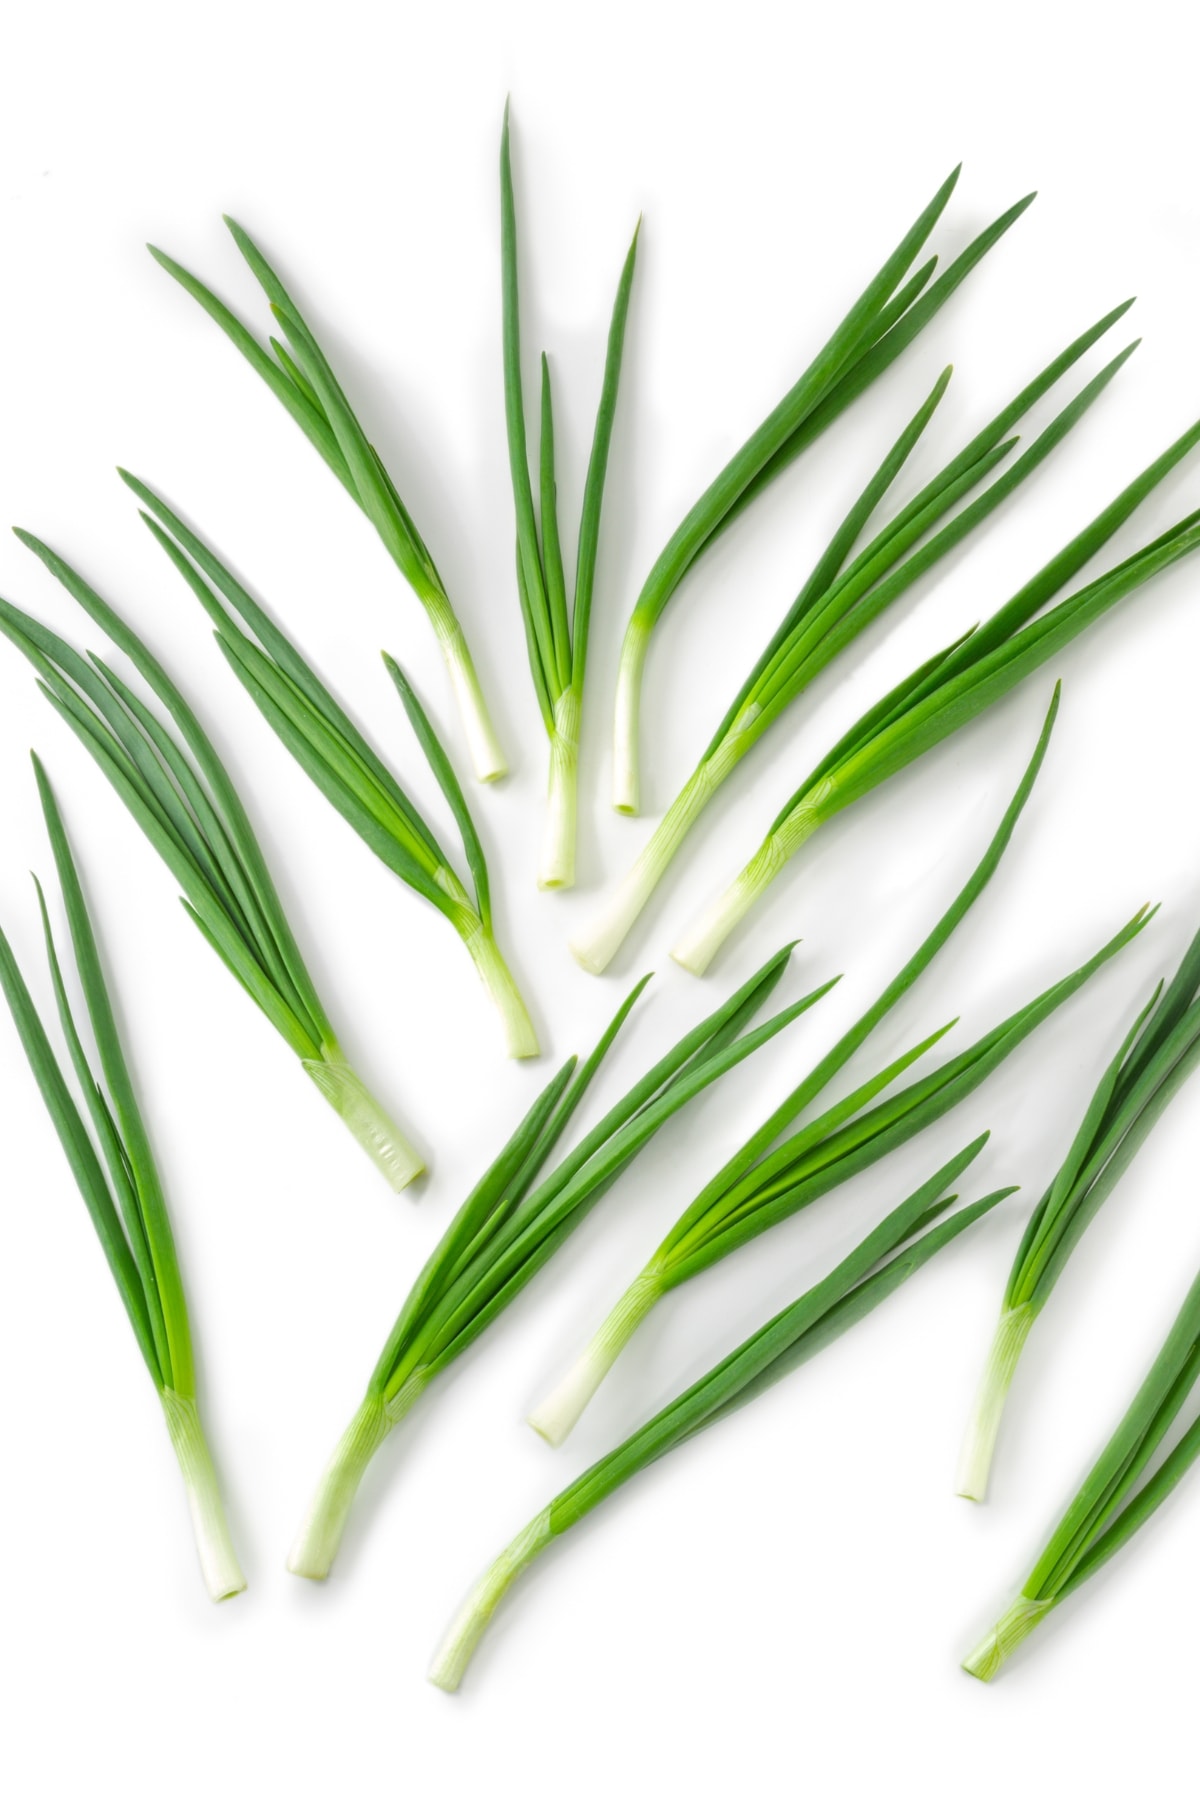 Isolated Green Onions on a White Background